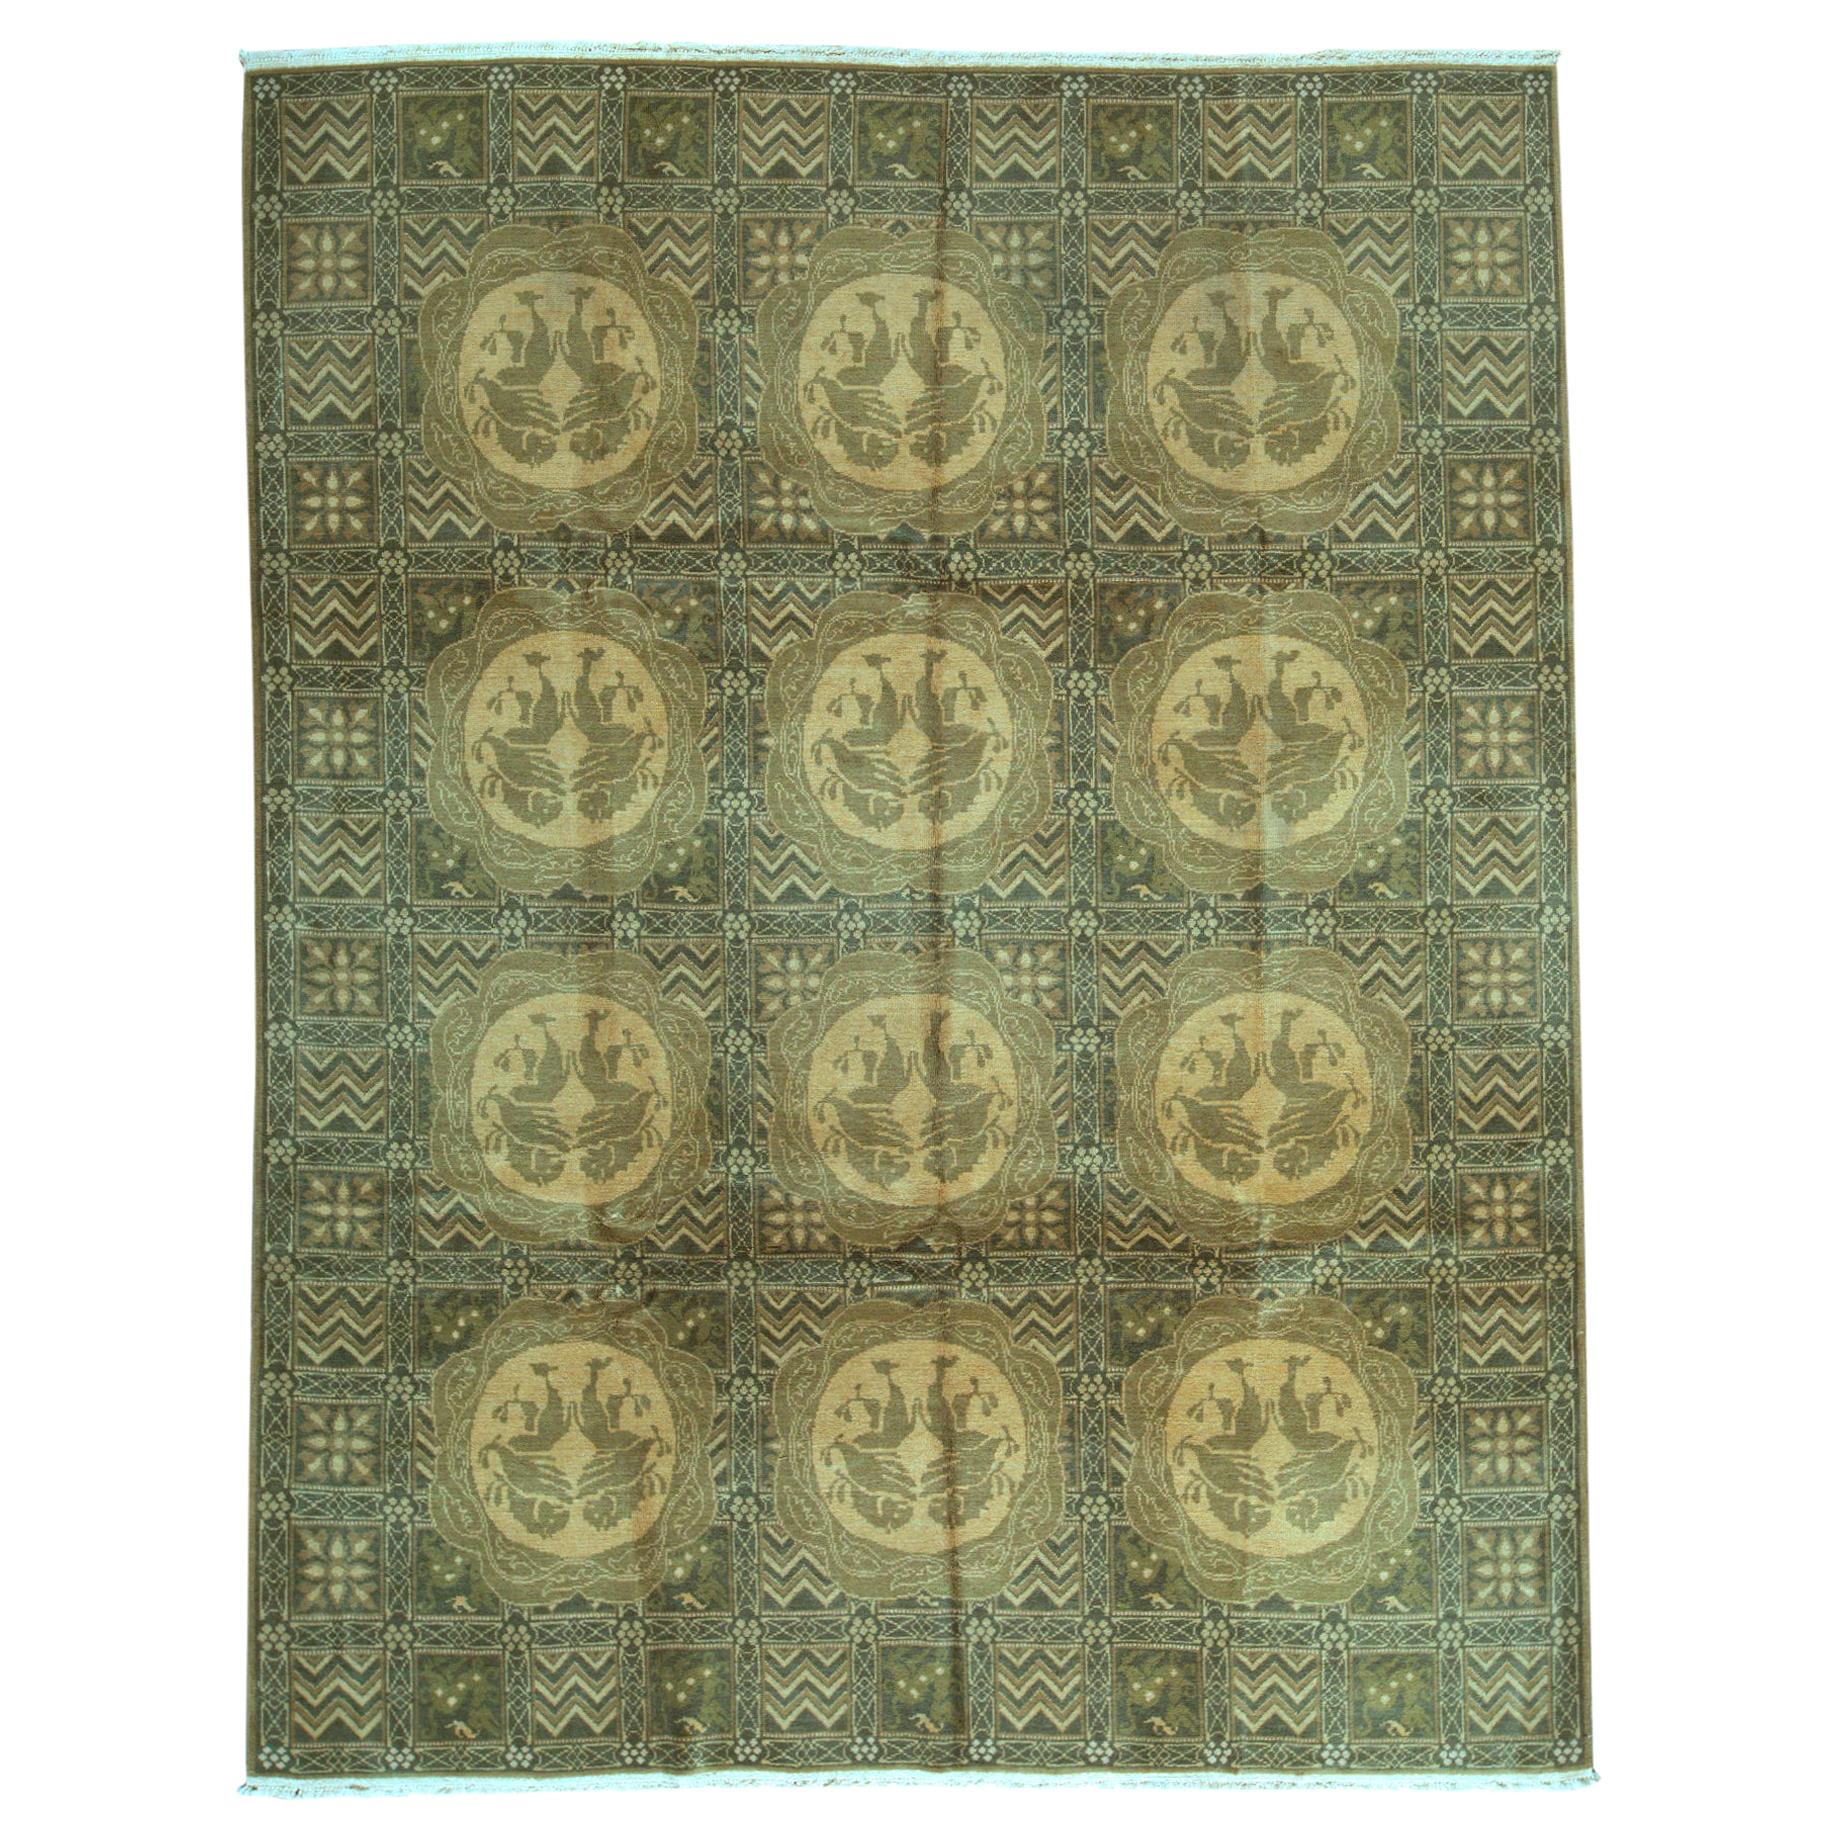  Traditional Handwoven Luxury Wool Semi Antique Ivory / Green Rug.